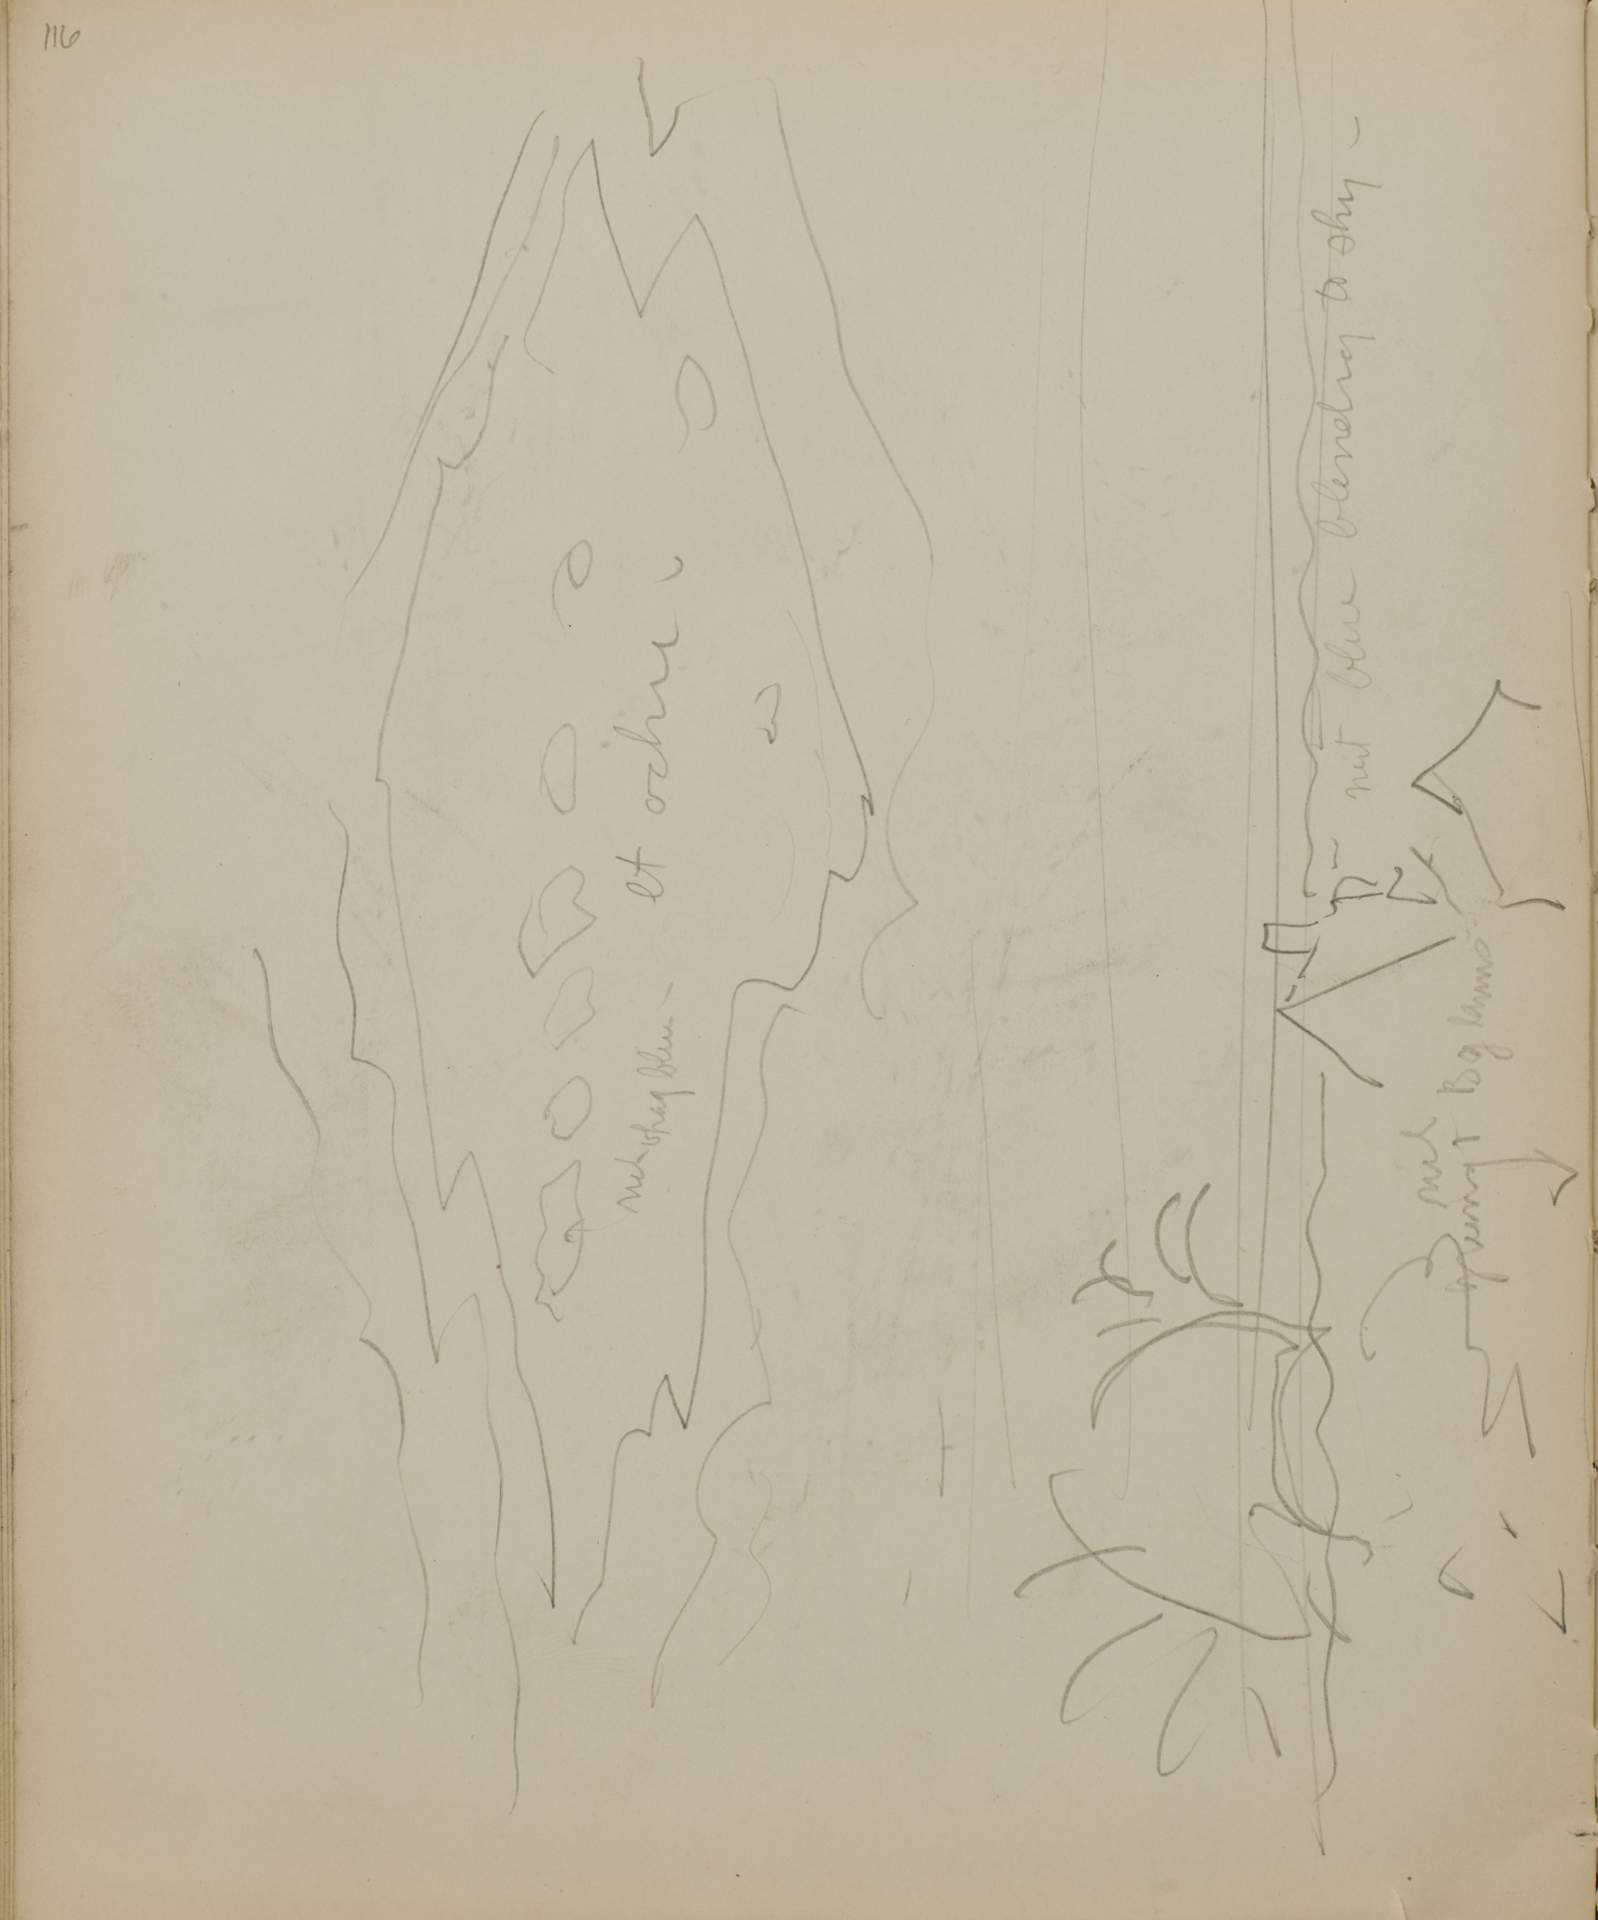 Untitled (sketch of landscape with sky)